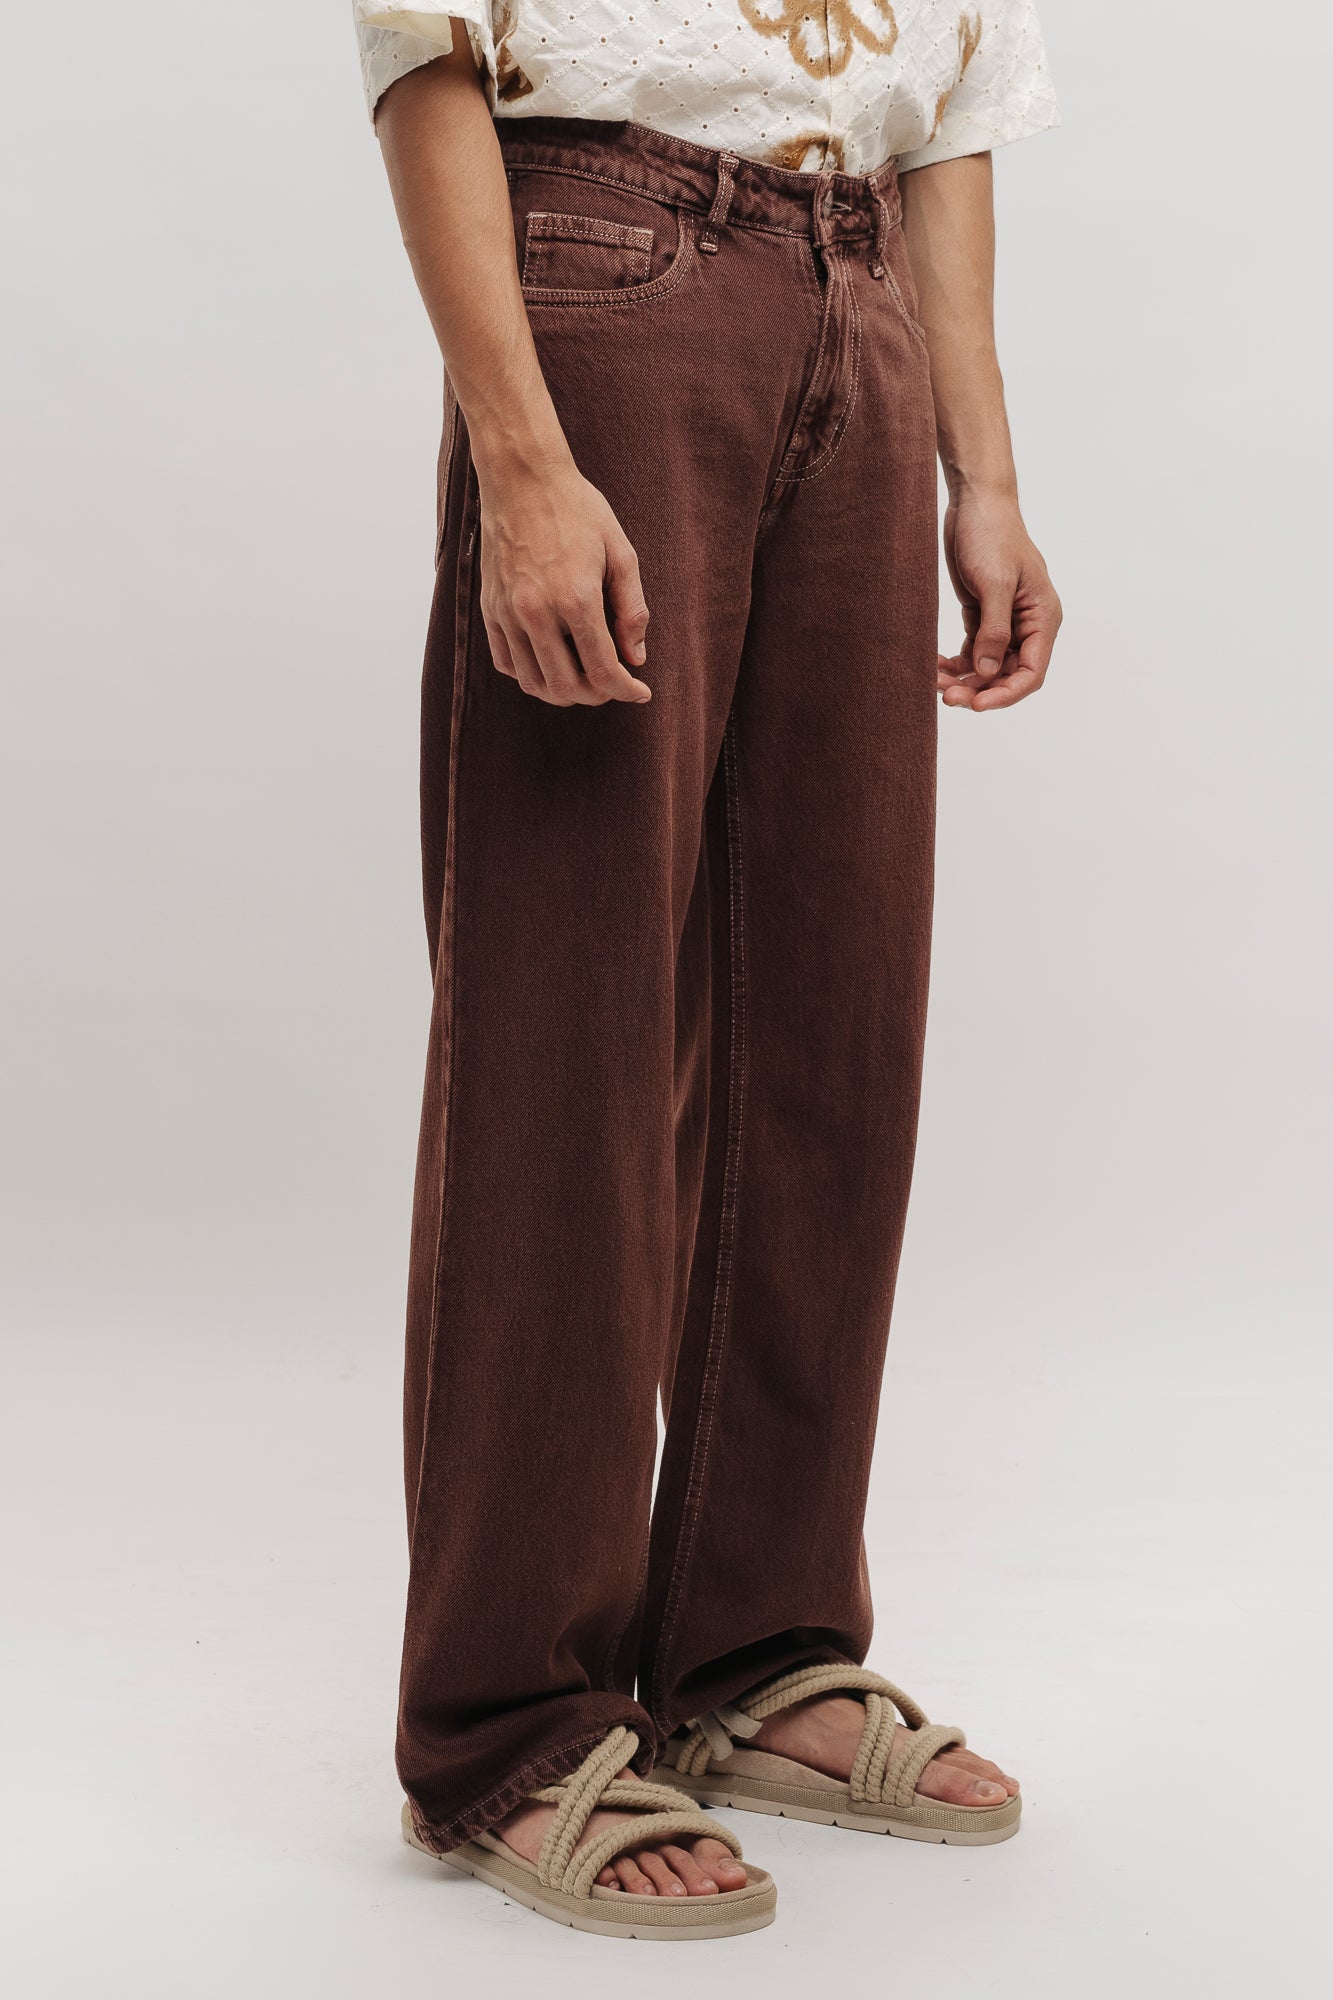 CONTRAST BROWN MEN'S RELAXED STRAIGHT JEANS